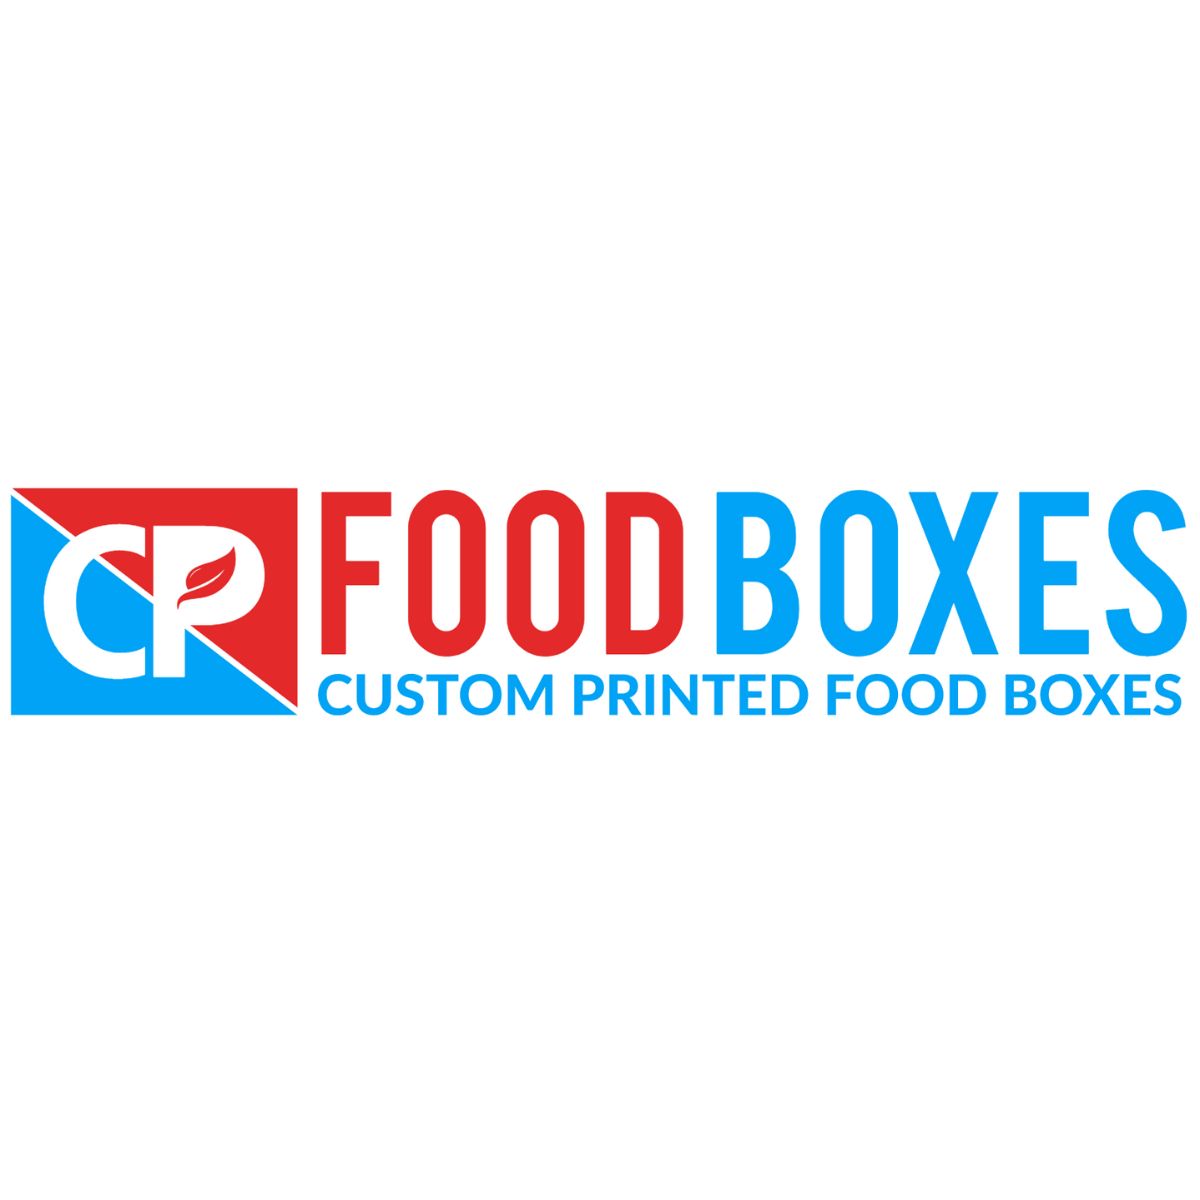 CP Food Boxes